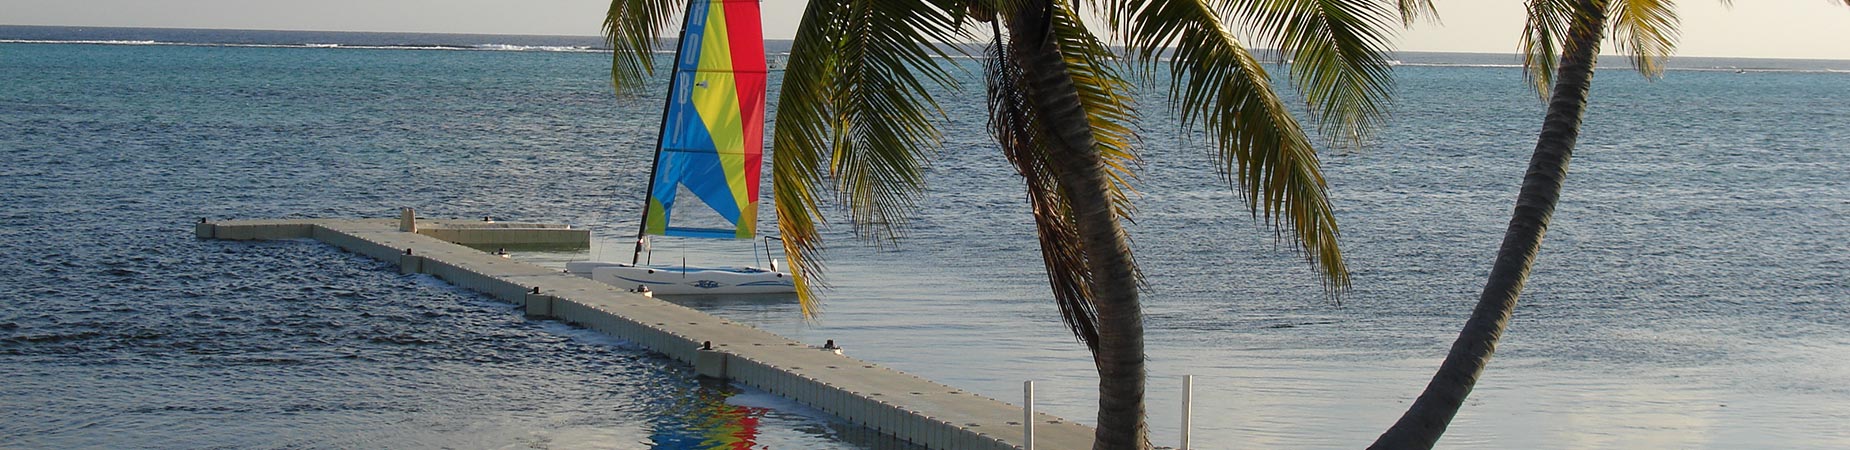 View from beach of floating dock with colorful sail boat